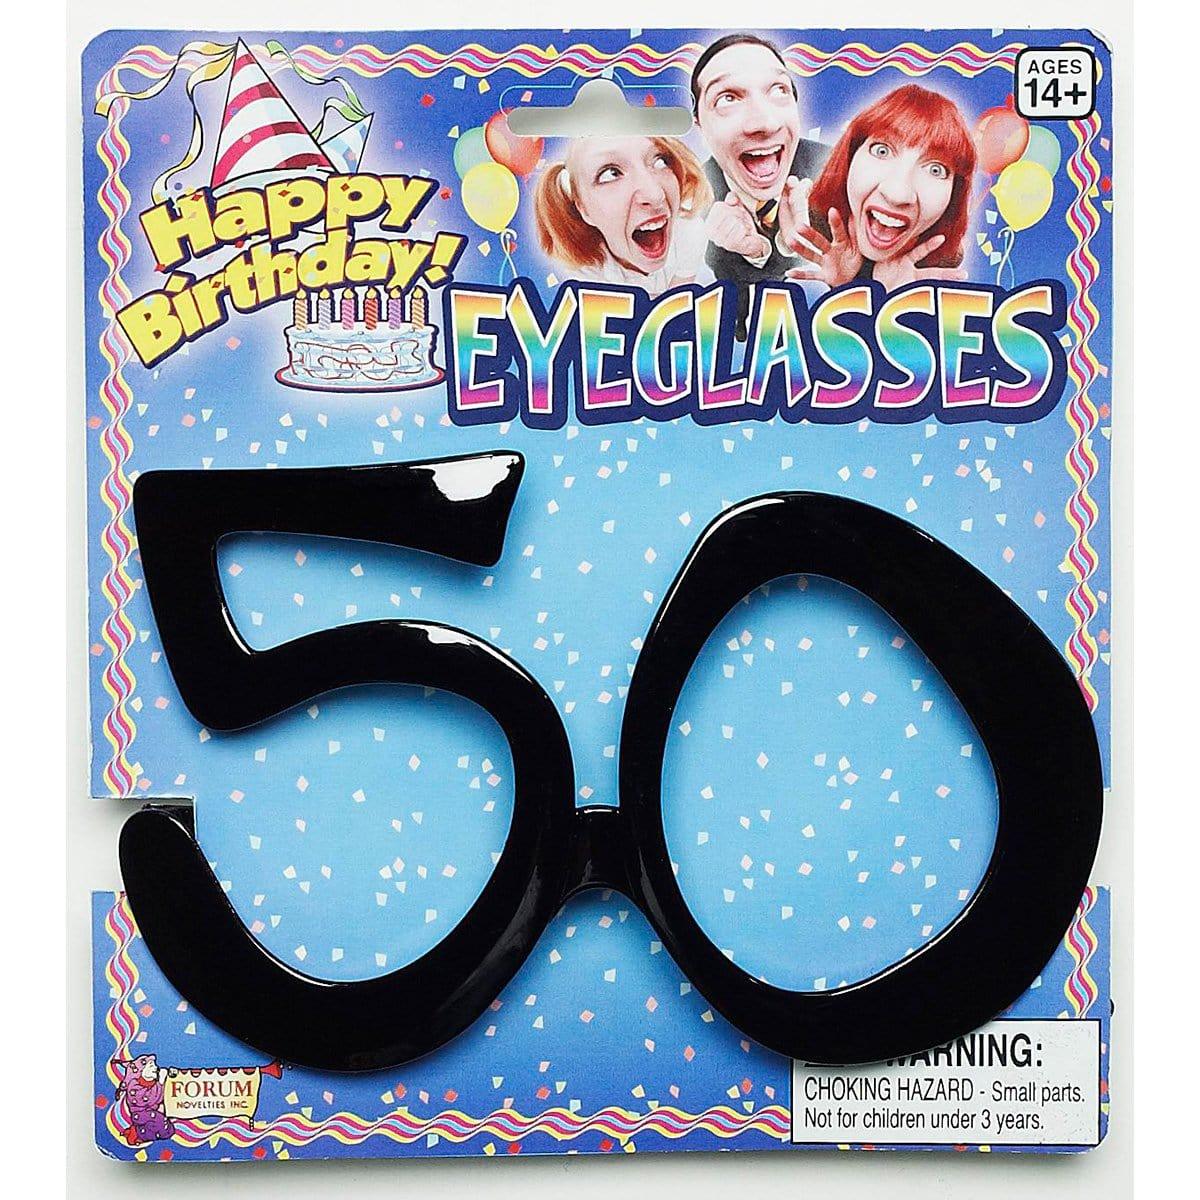 Buy Age Specific Birthday Glasses - 50th Birthday sold at Party Expert